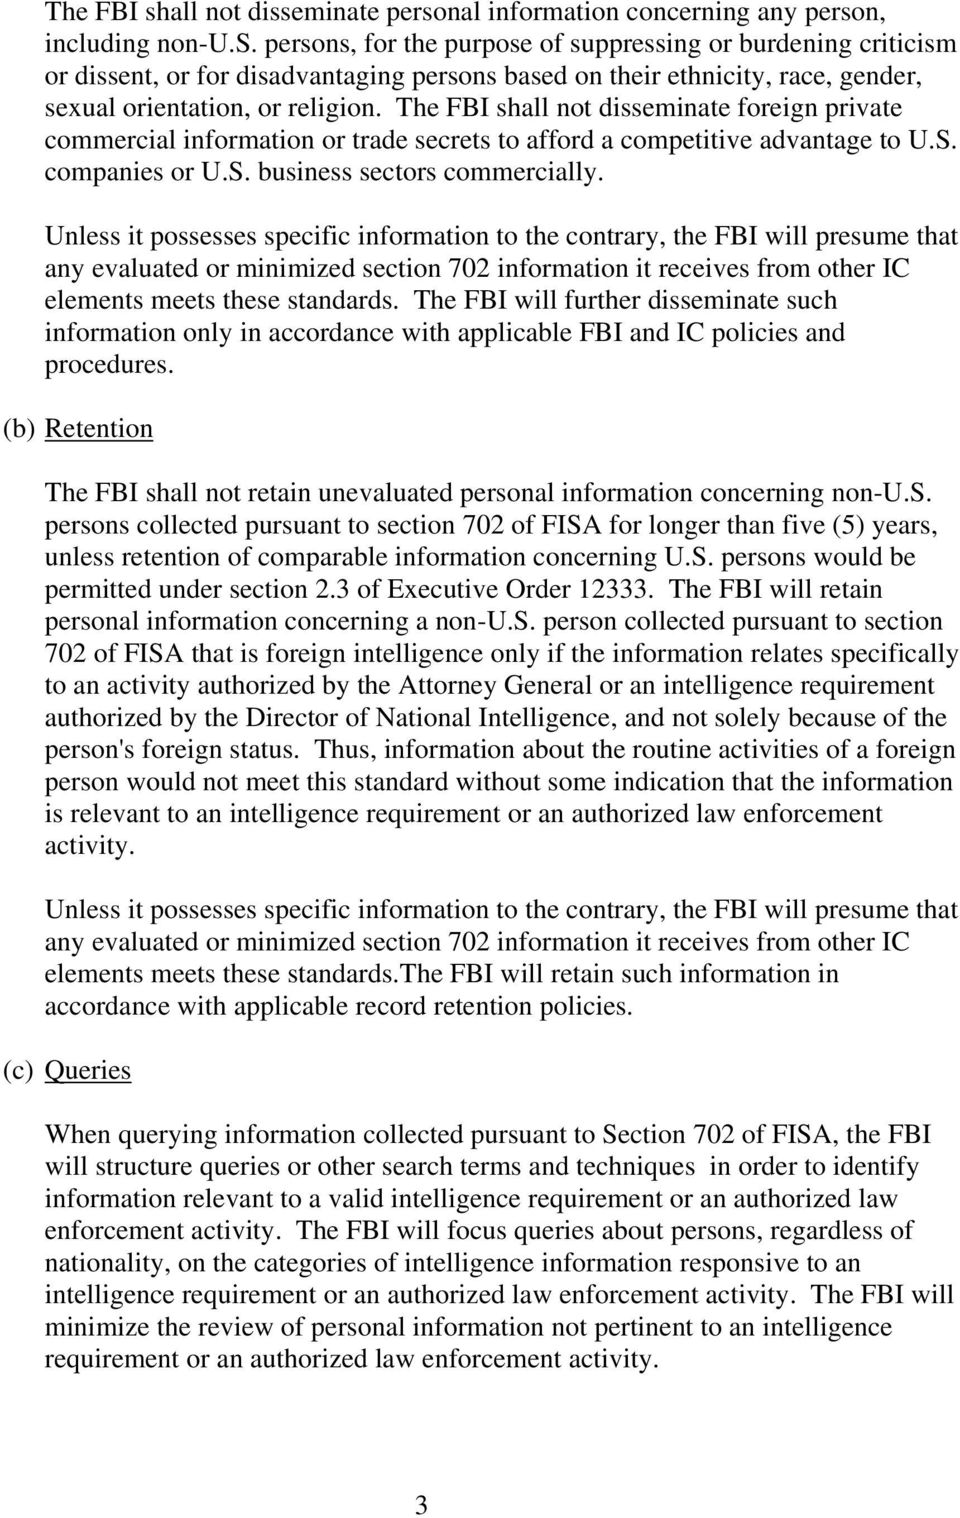 Unless it possesses specific information to the contrary, the FBI will presume that any evaluated or minimized section 702 information it receives from other IC elements meets these standards.